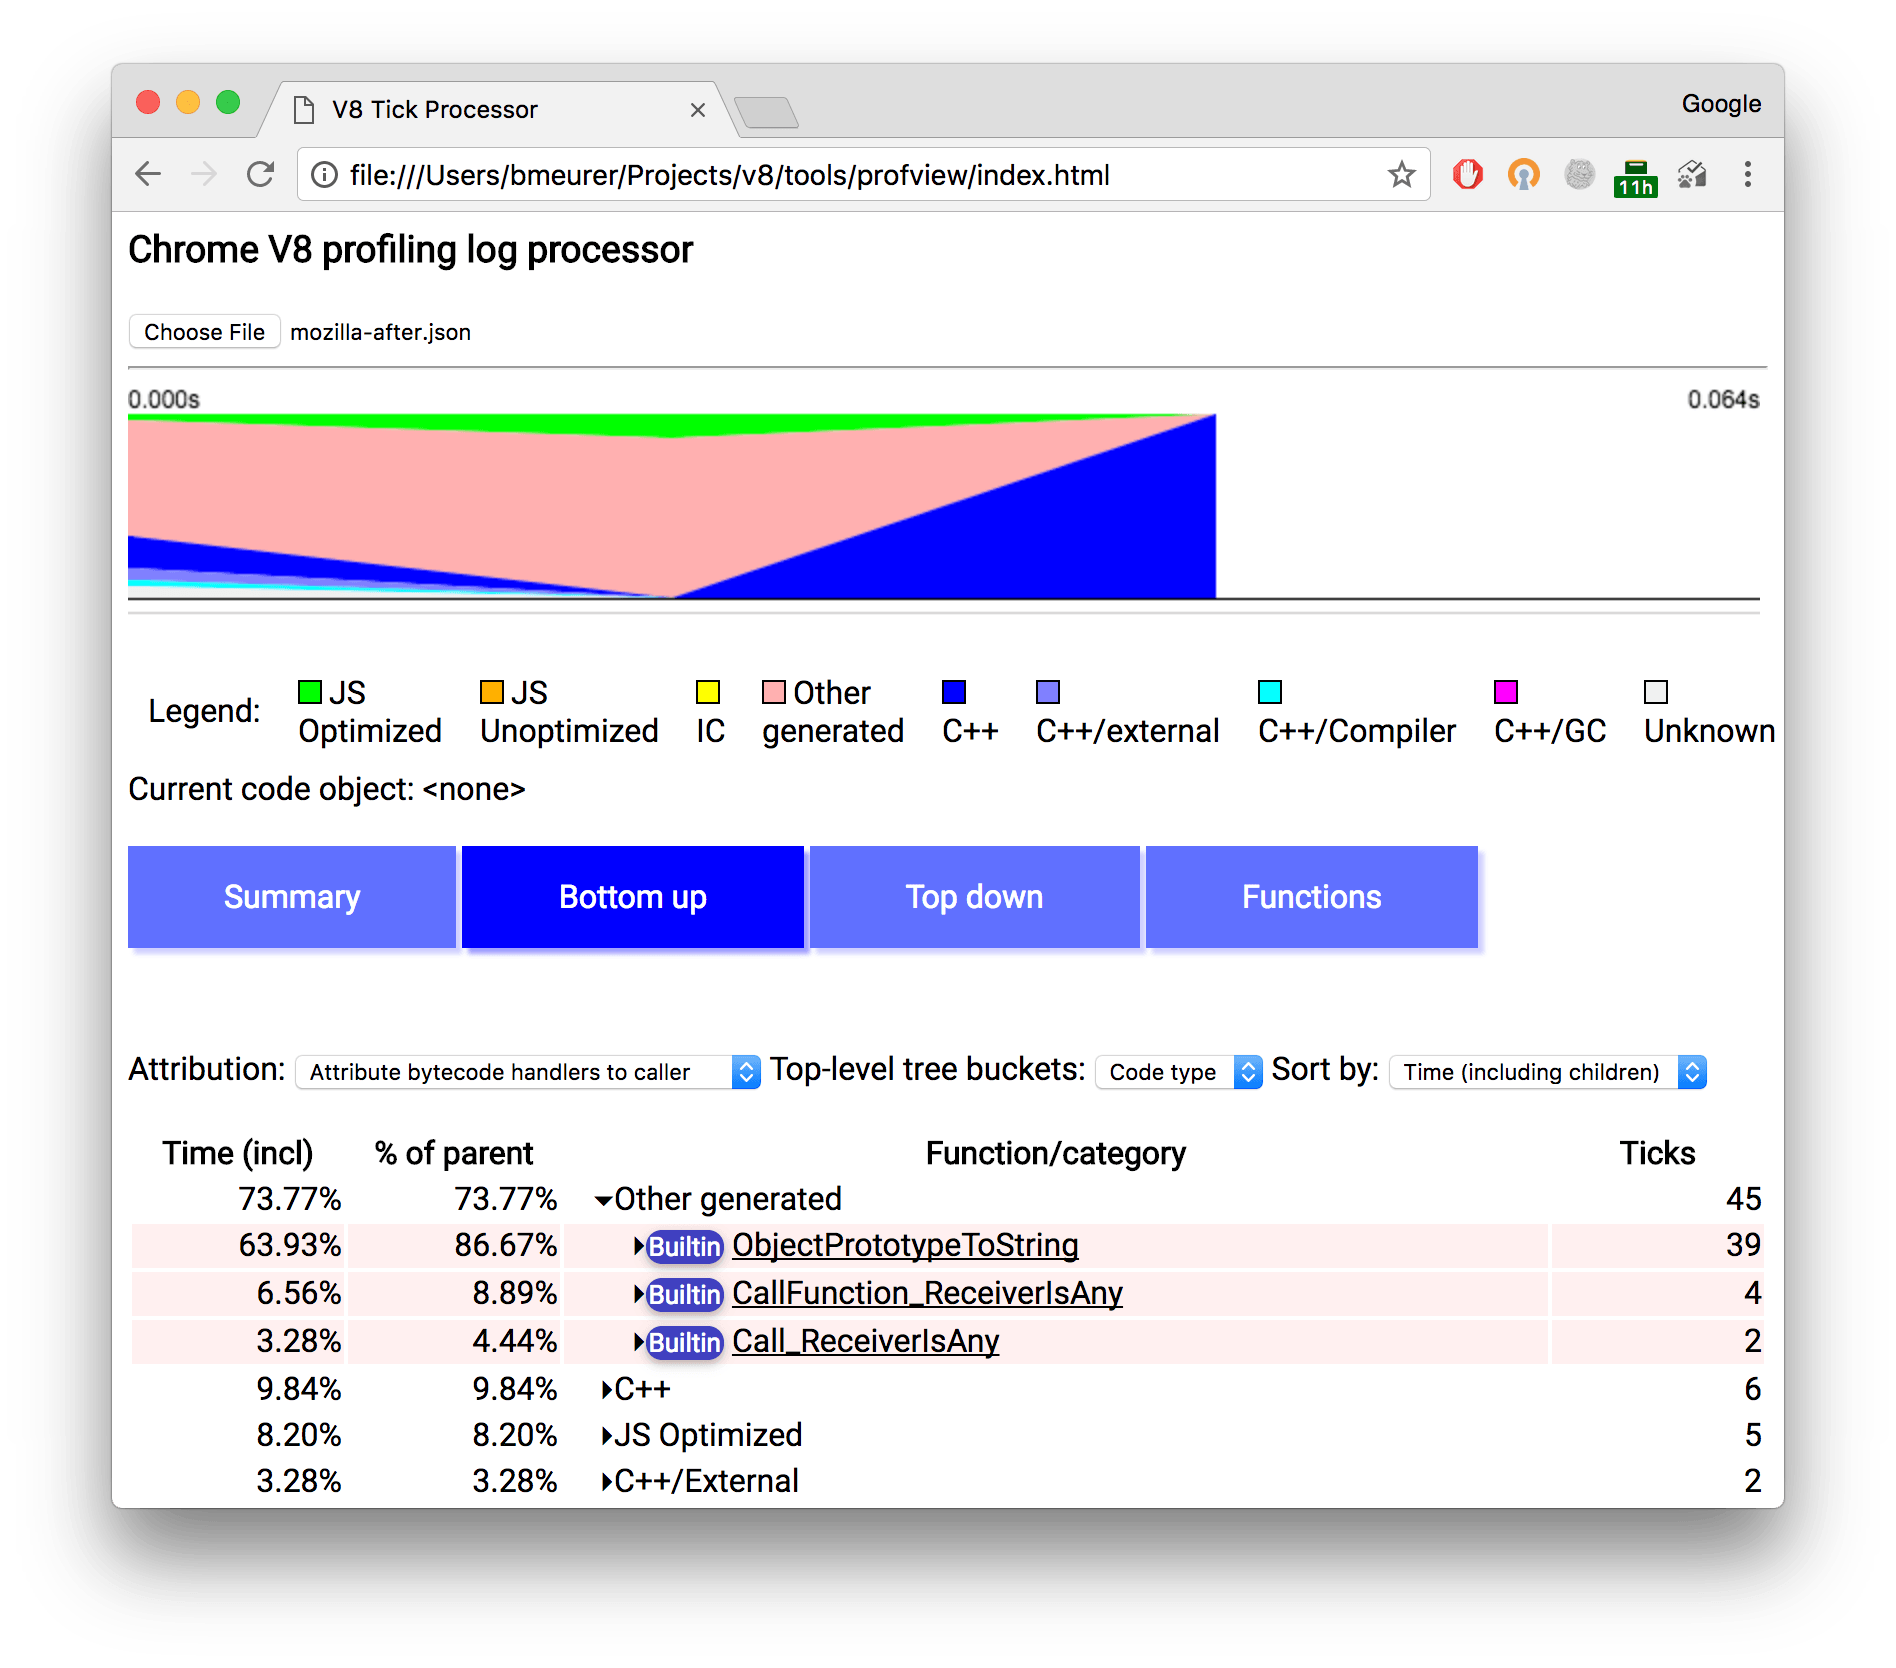 Mozilla micro-benchmark performance profile (after)